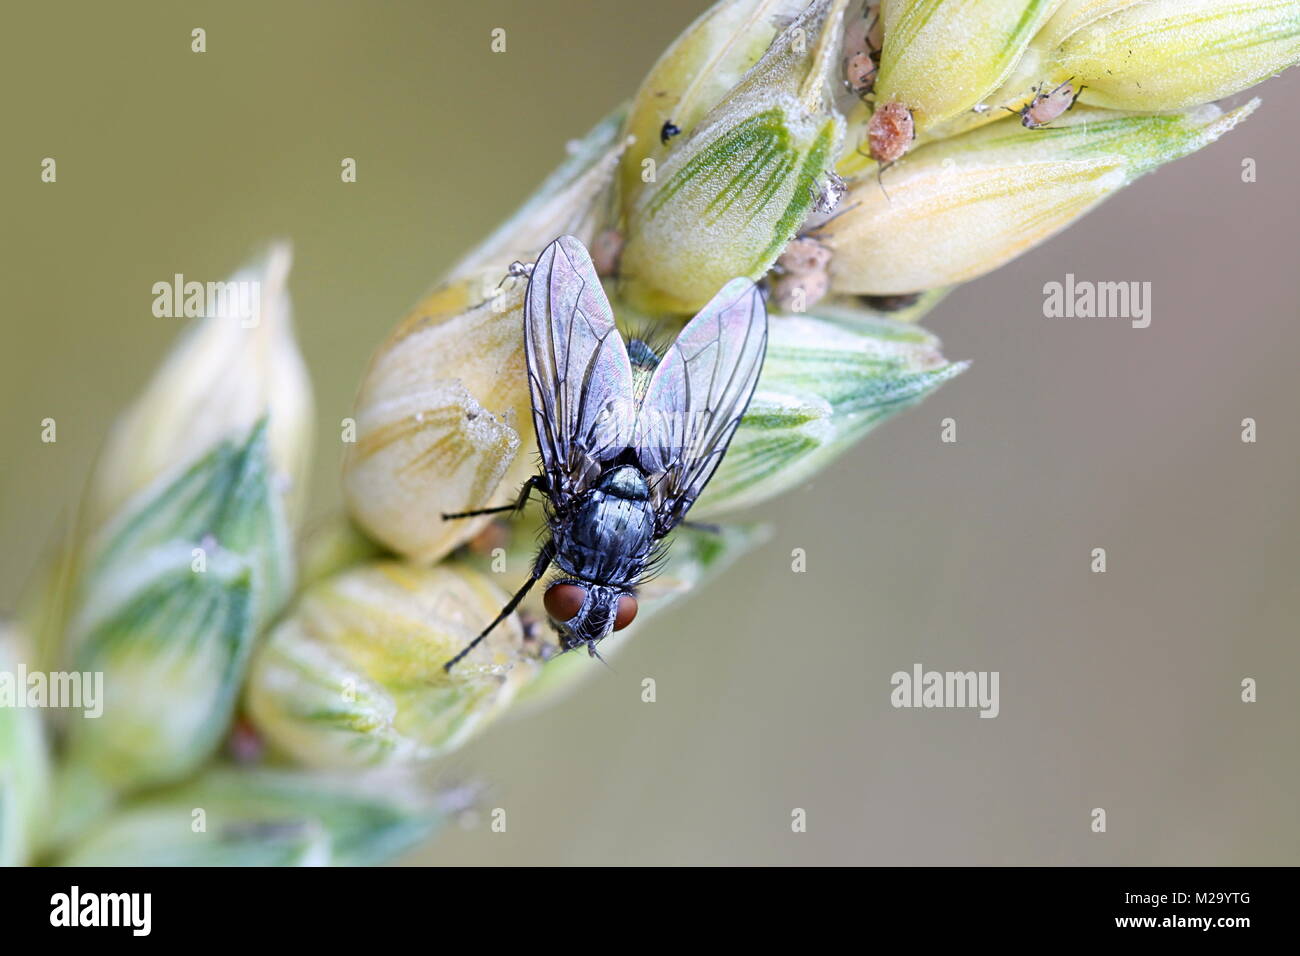 Calliphoridae, commonly known as blow flies, blow-flies, carrion flies, bluebottles, greenbottles, or cluster flies , resting on wheat Stock Photo